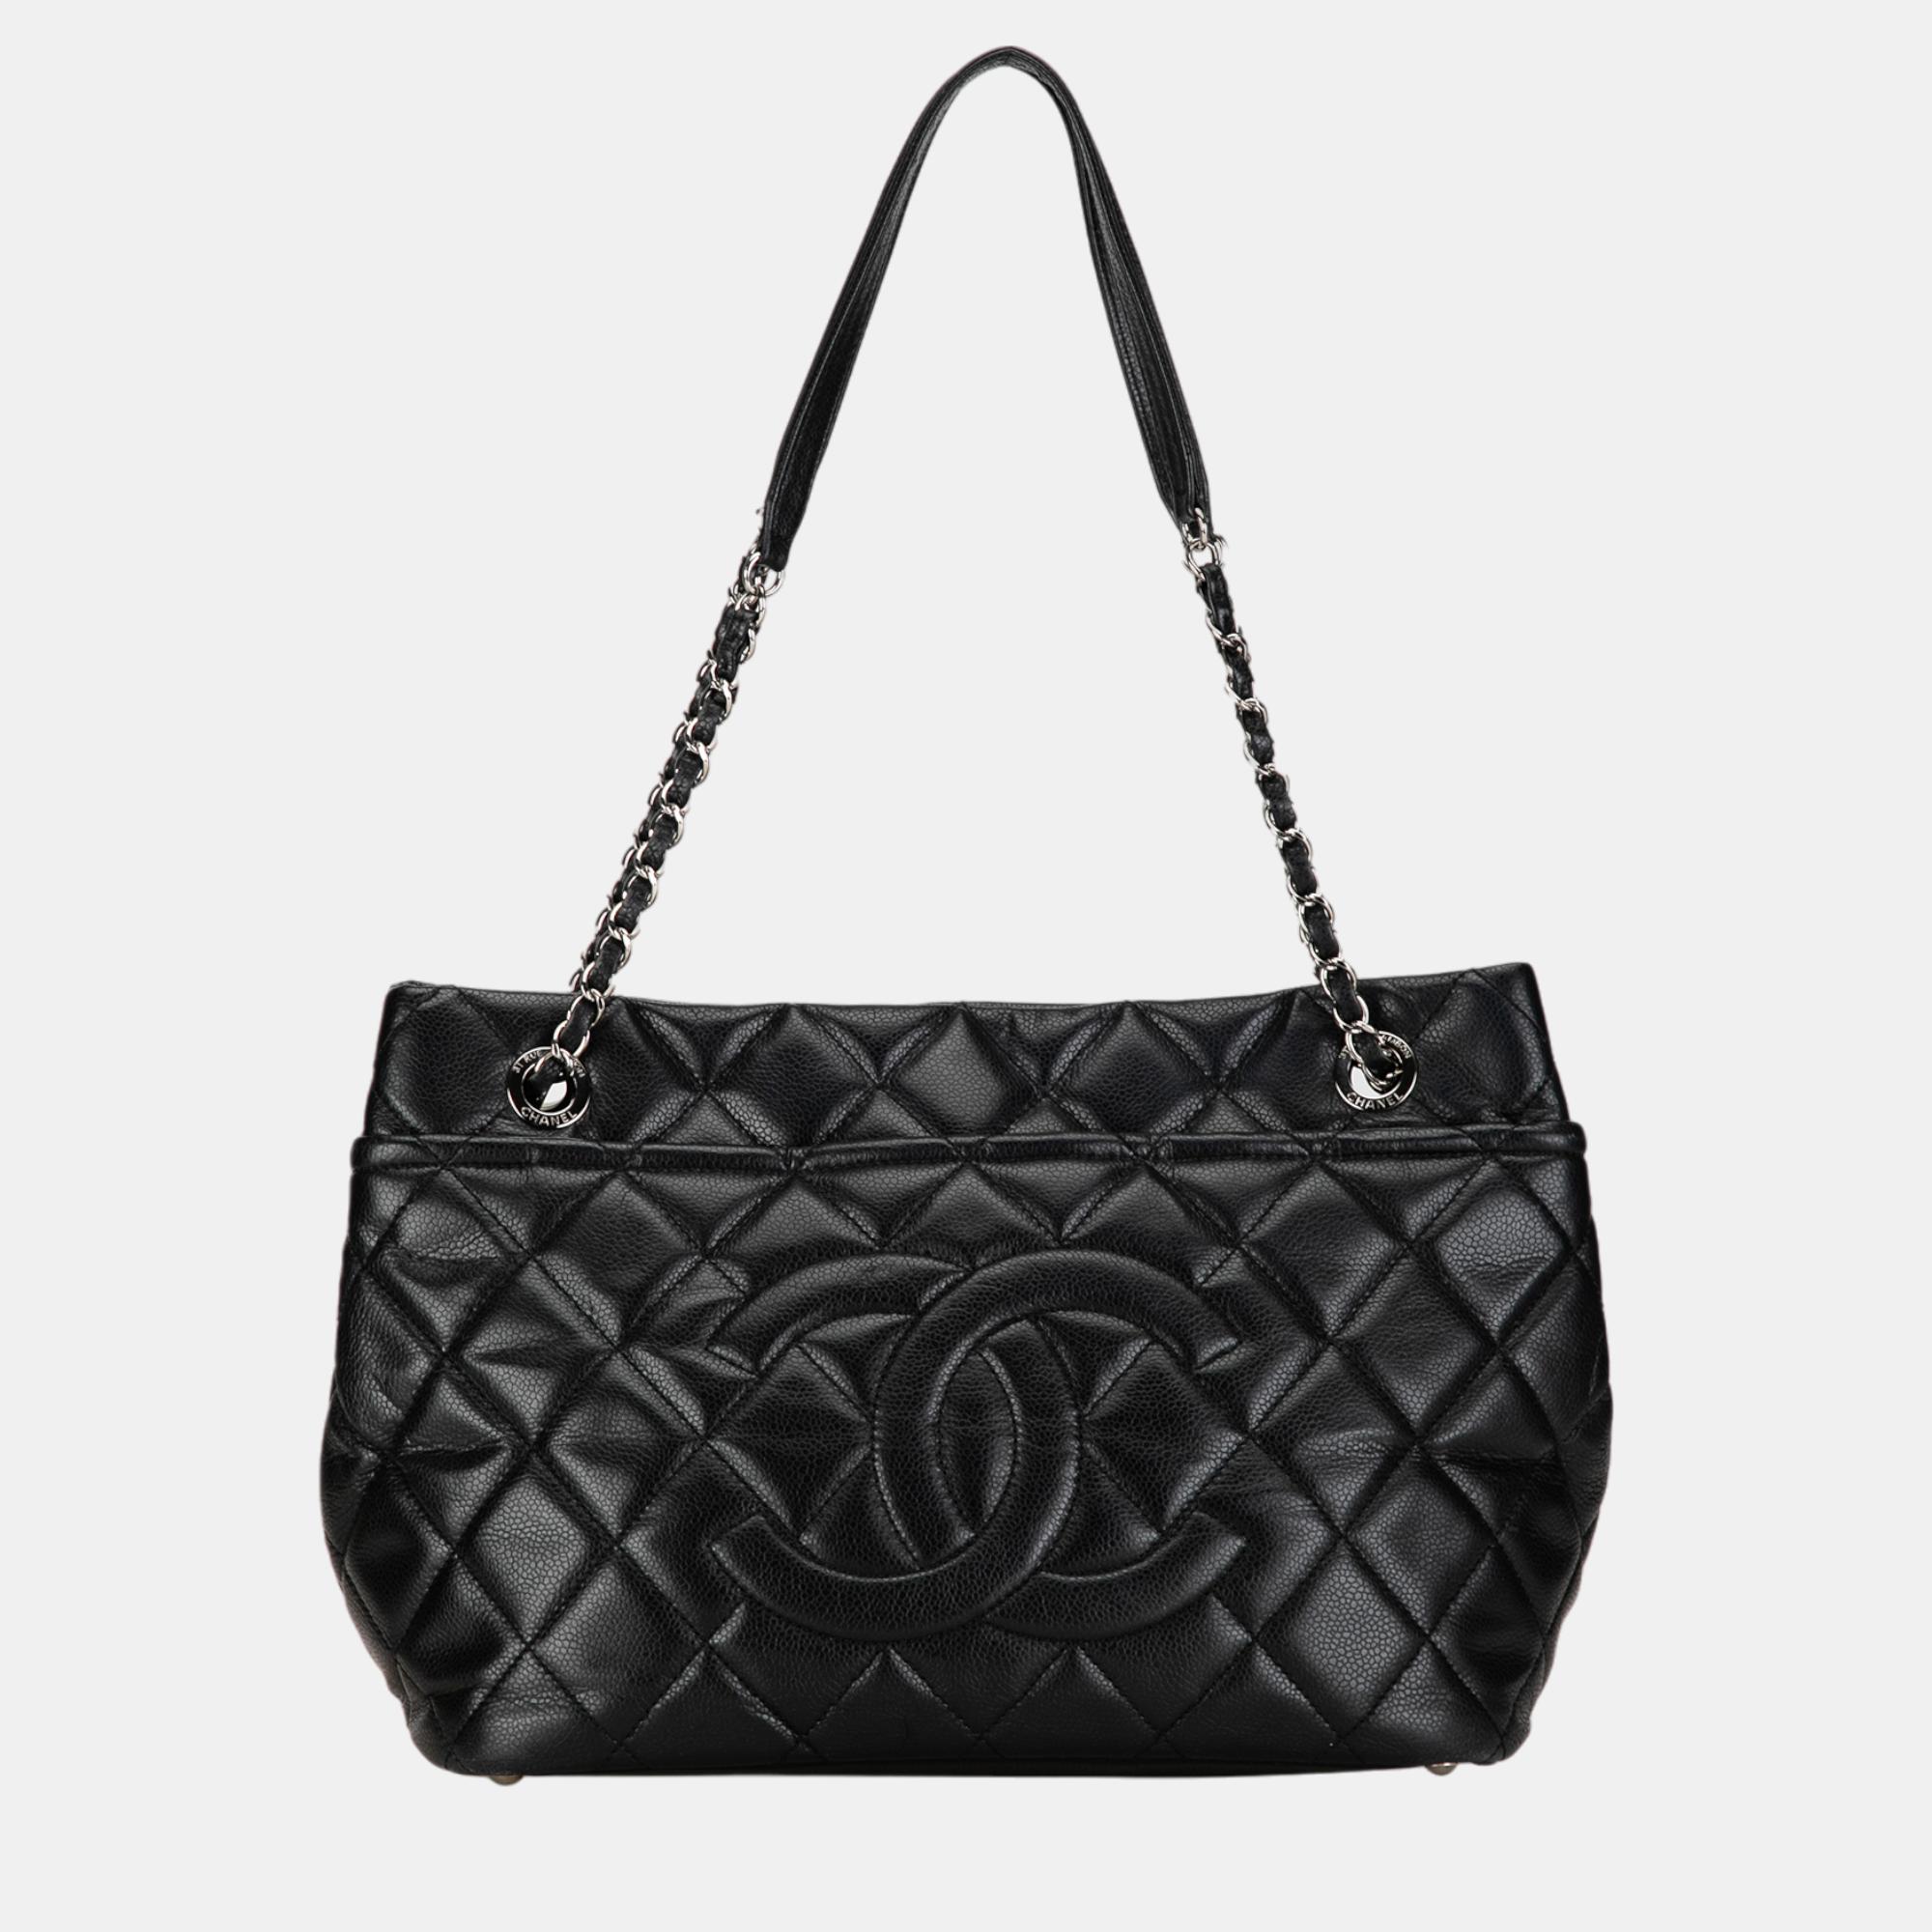 Pre-owned Chanel Black Cc Caviar Timeless Soft Tote